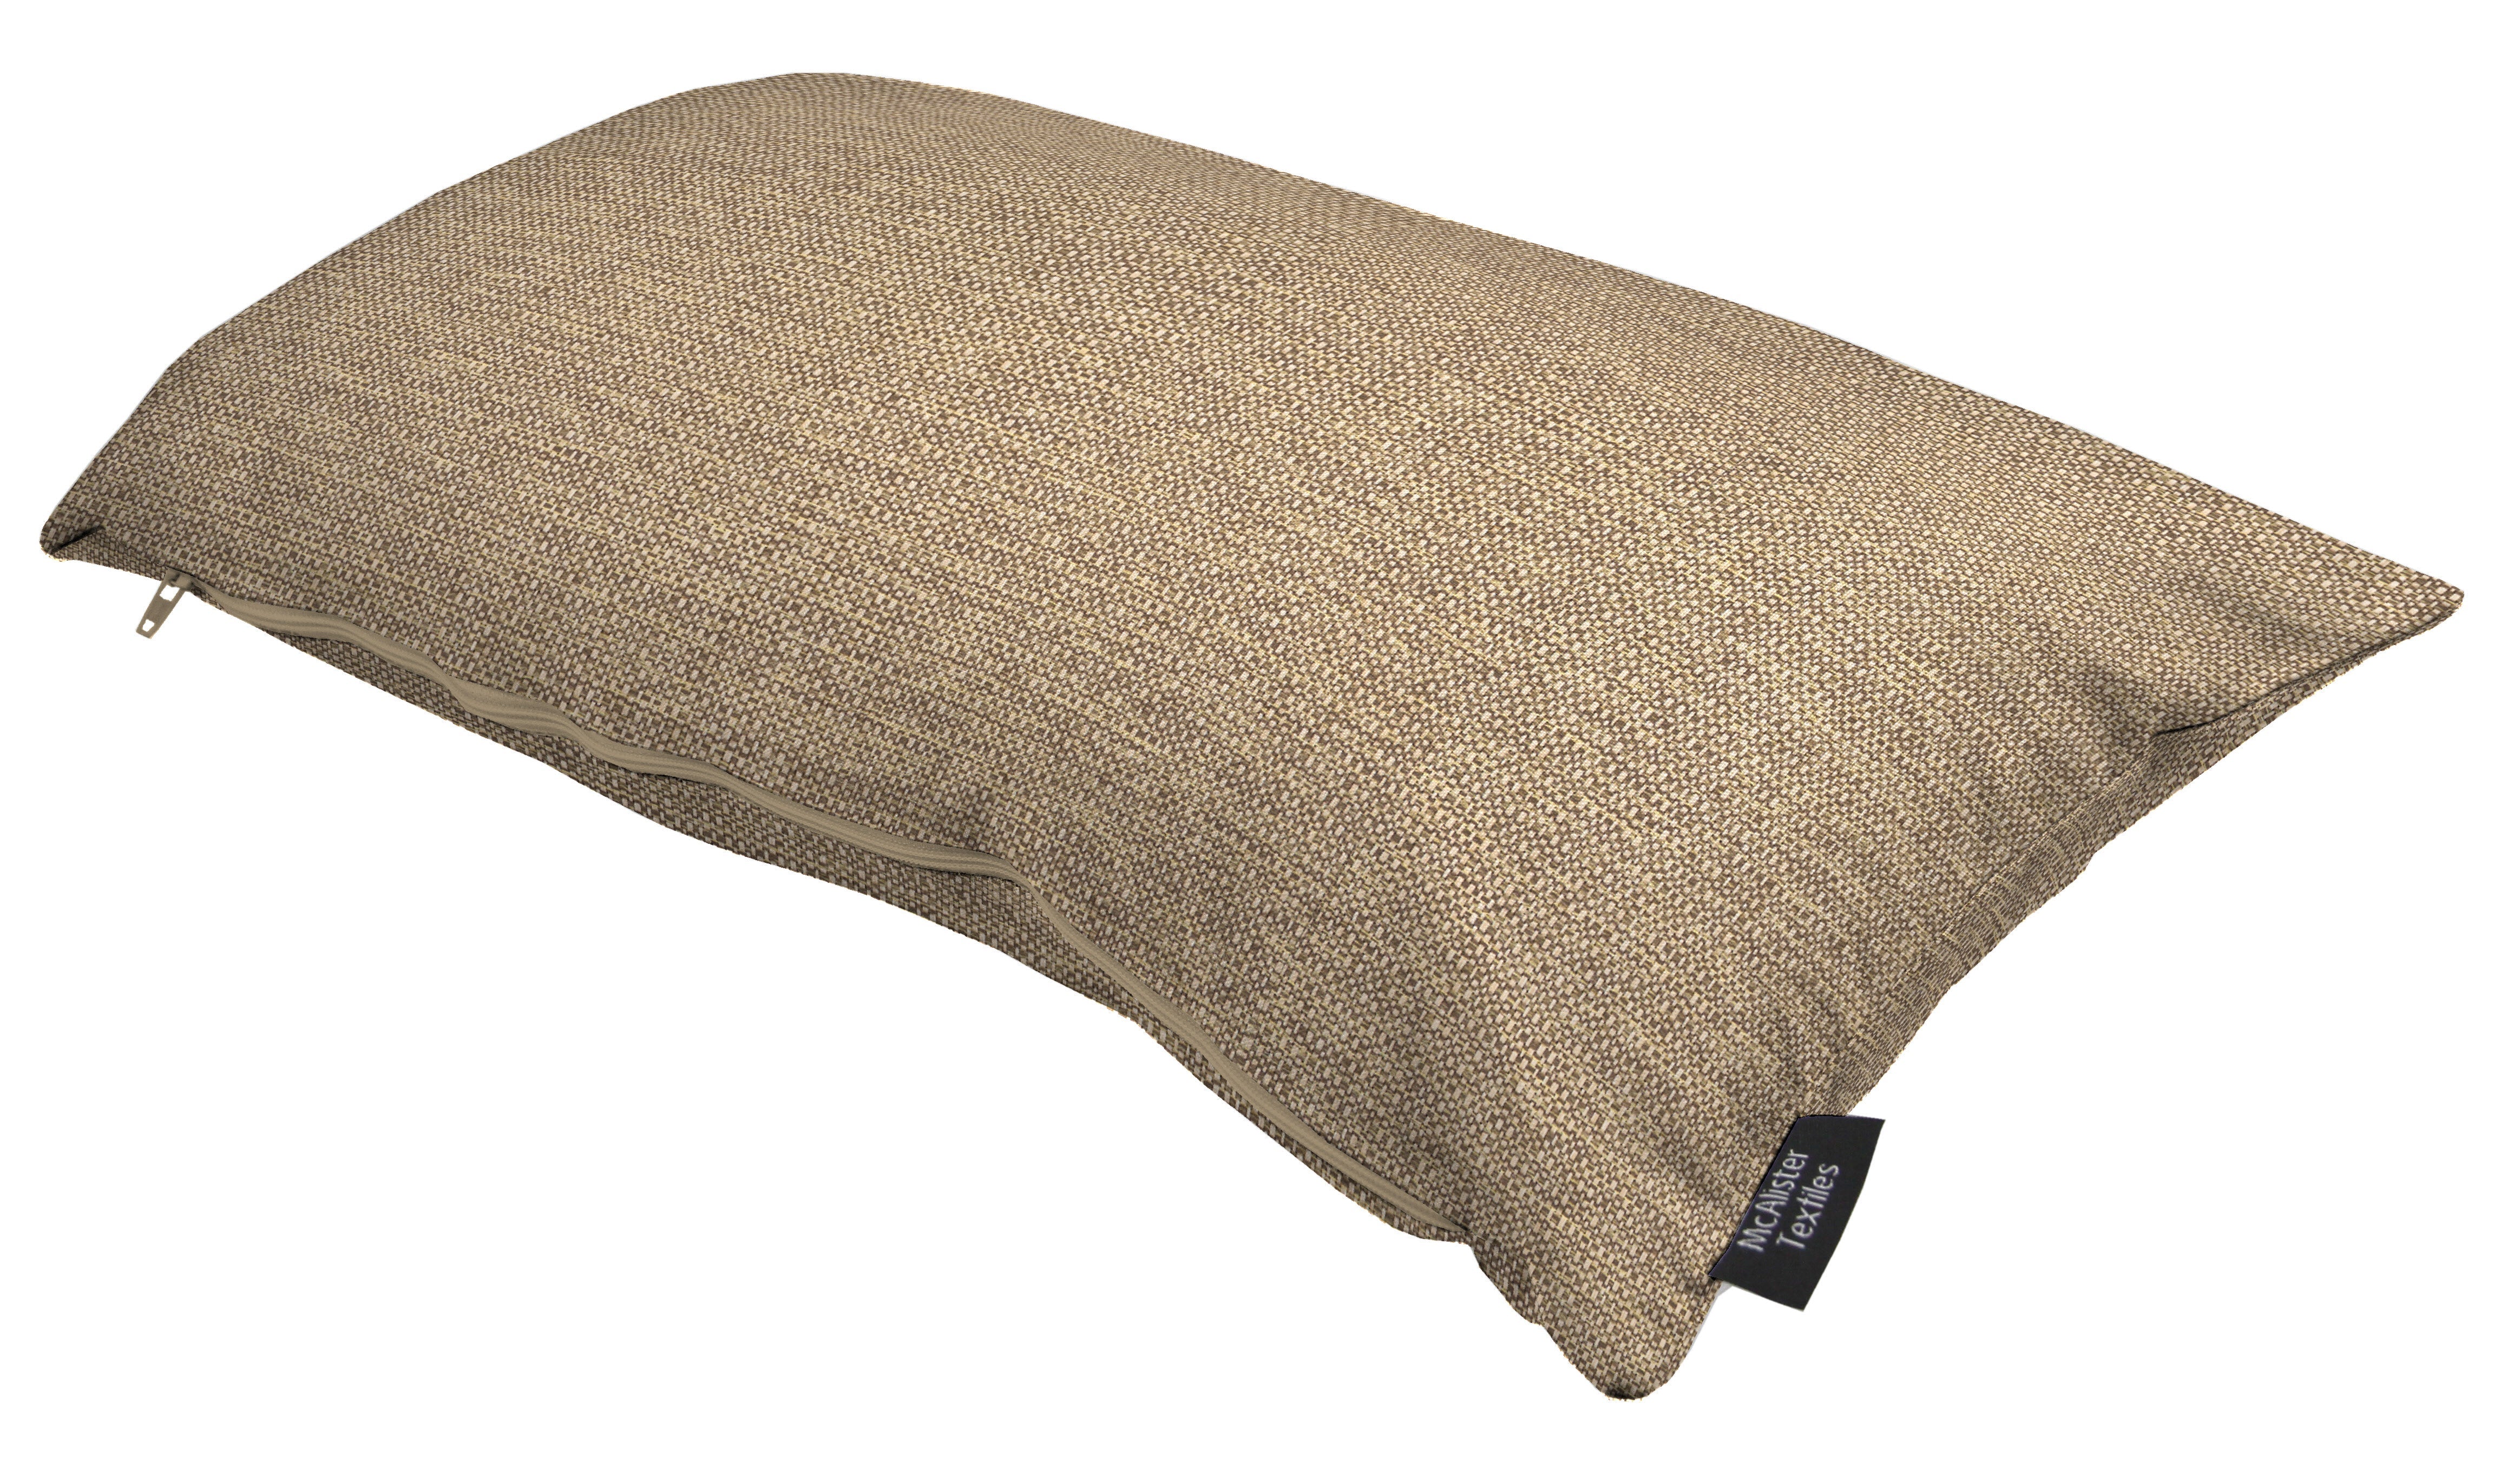 McAlister Textiles Roma Mocha Woven Cushion Cushions and Covers 